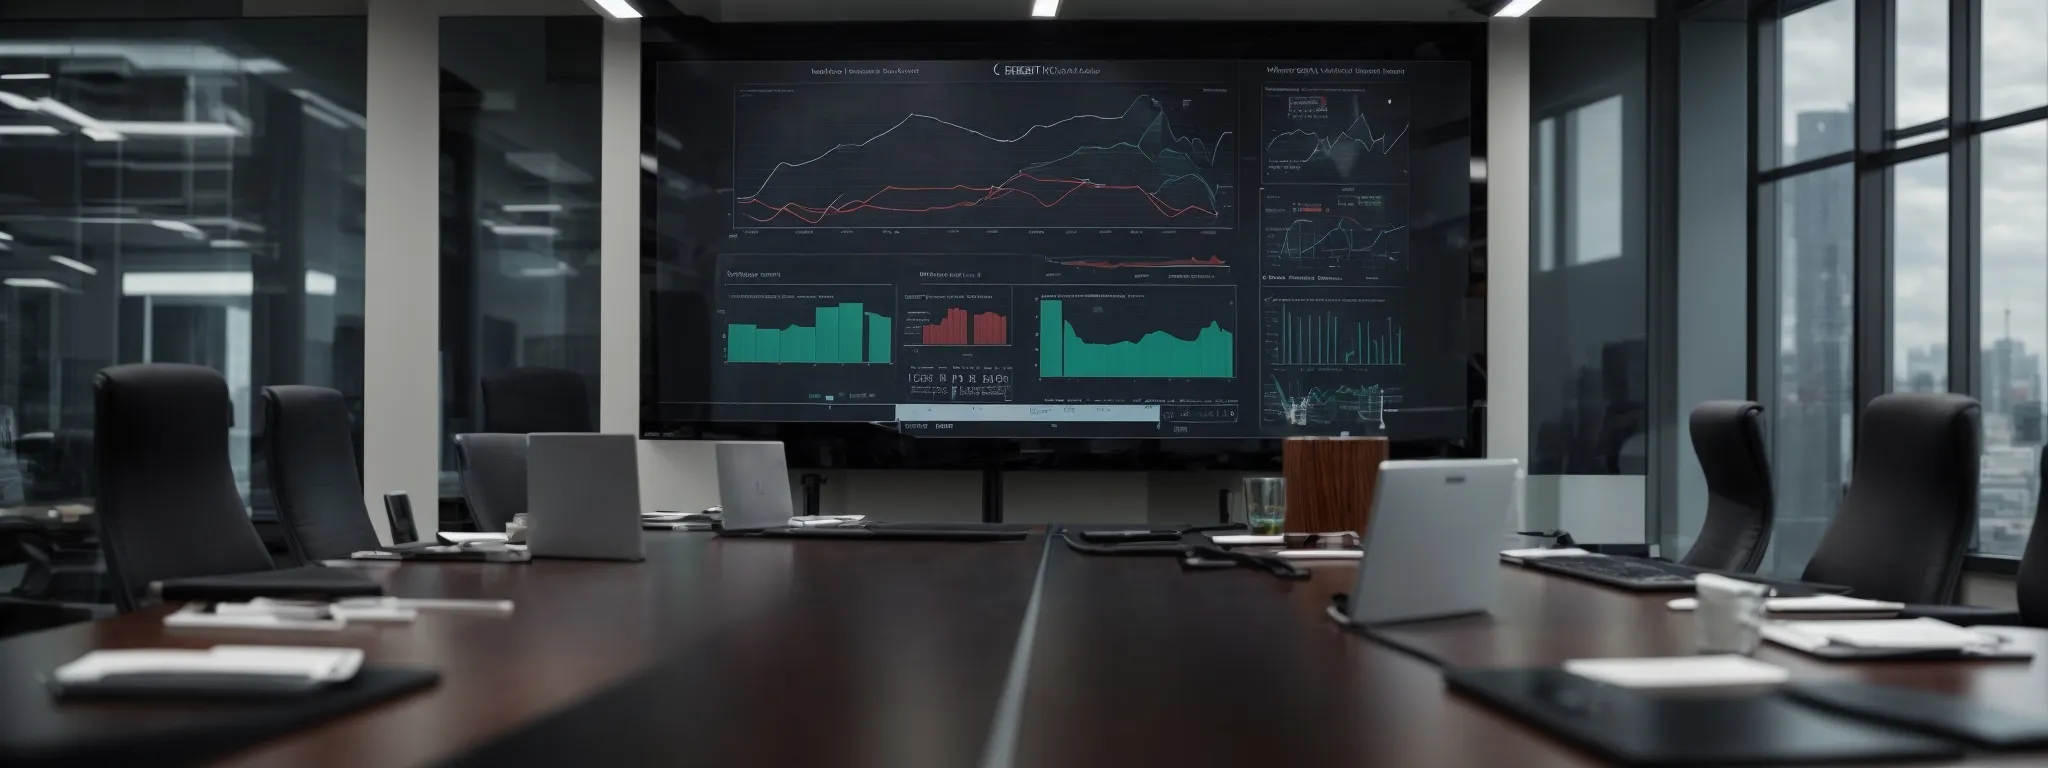 a professional meeting room with a large monitor displaying graphs and analytics.